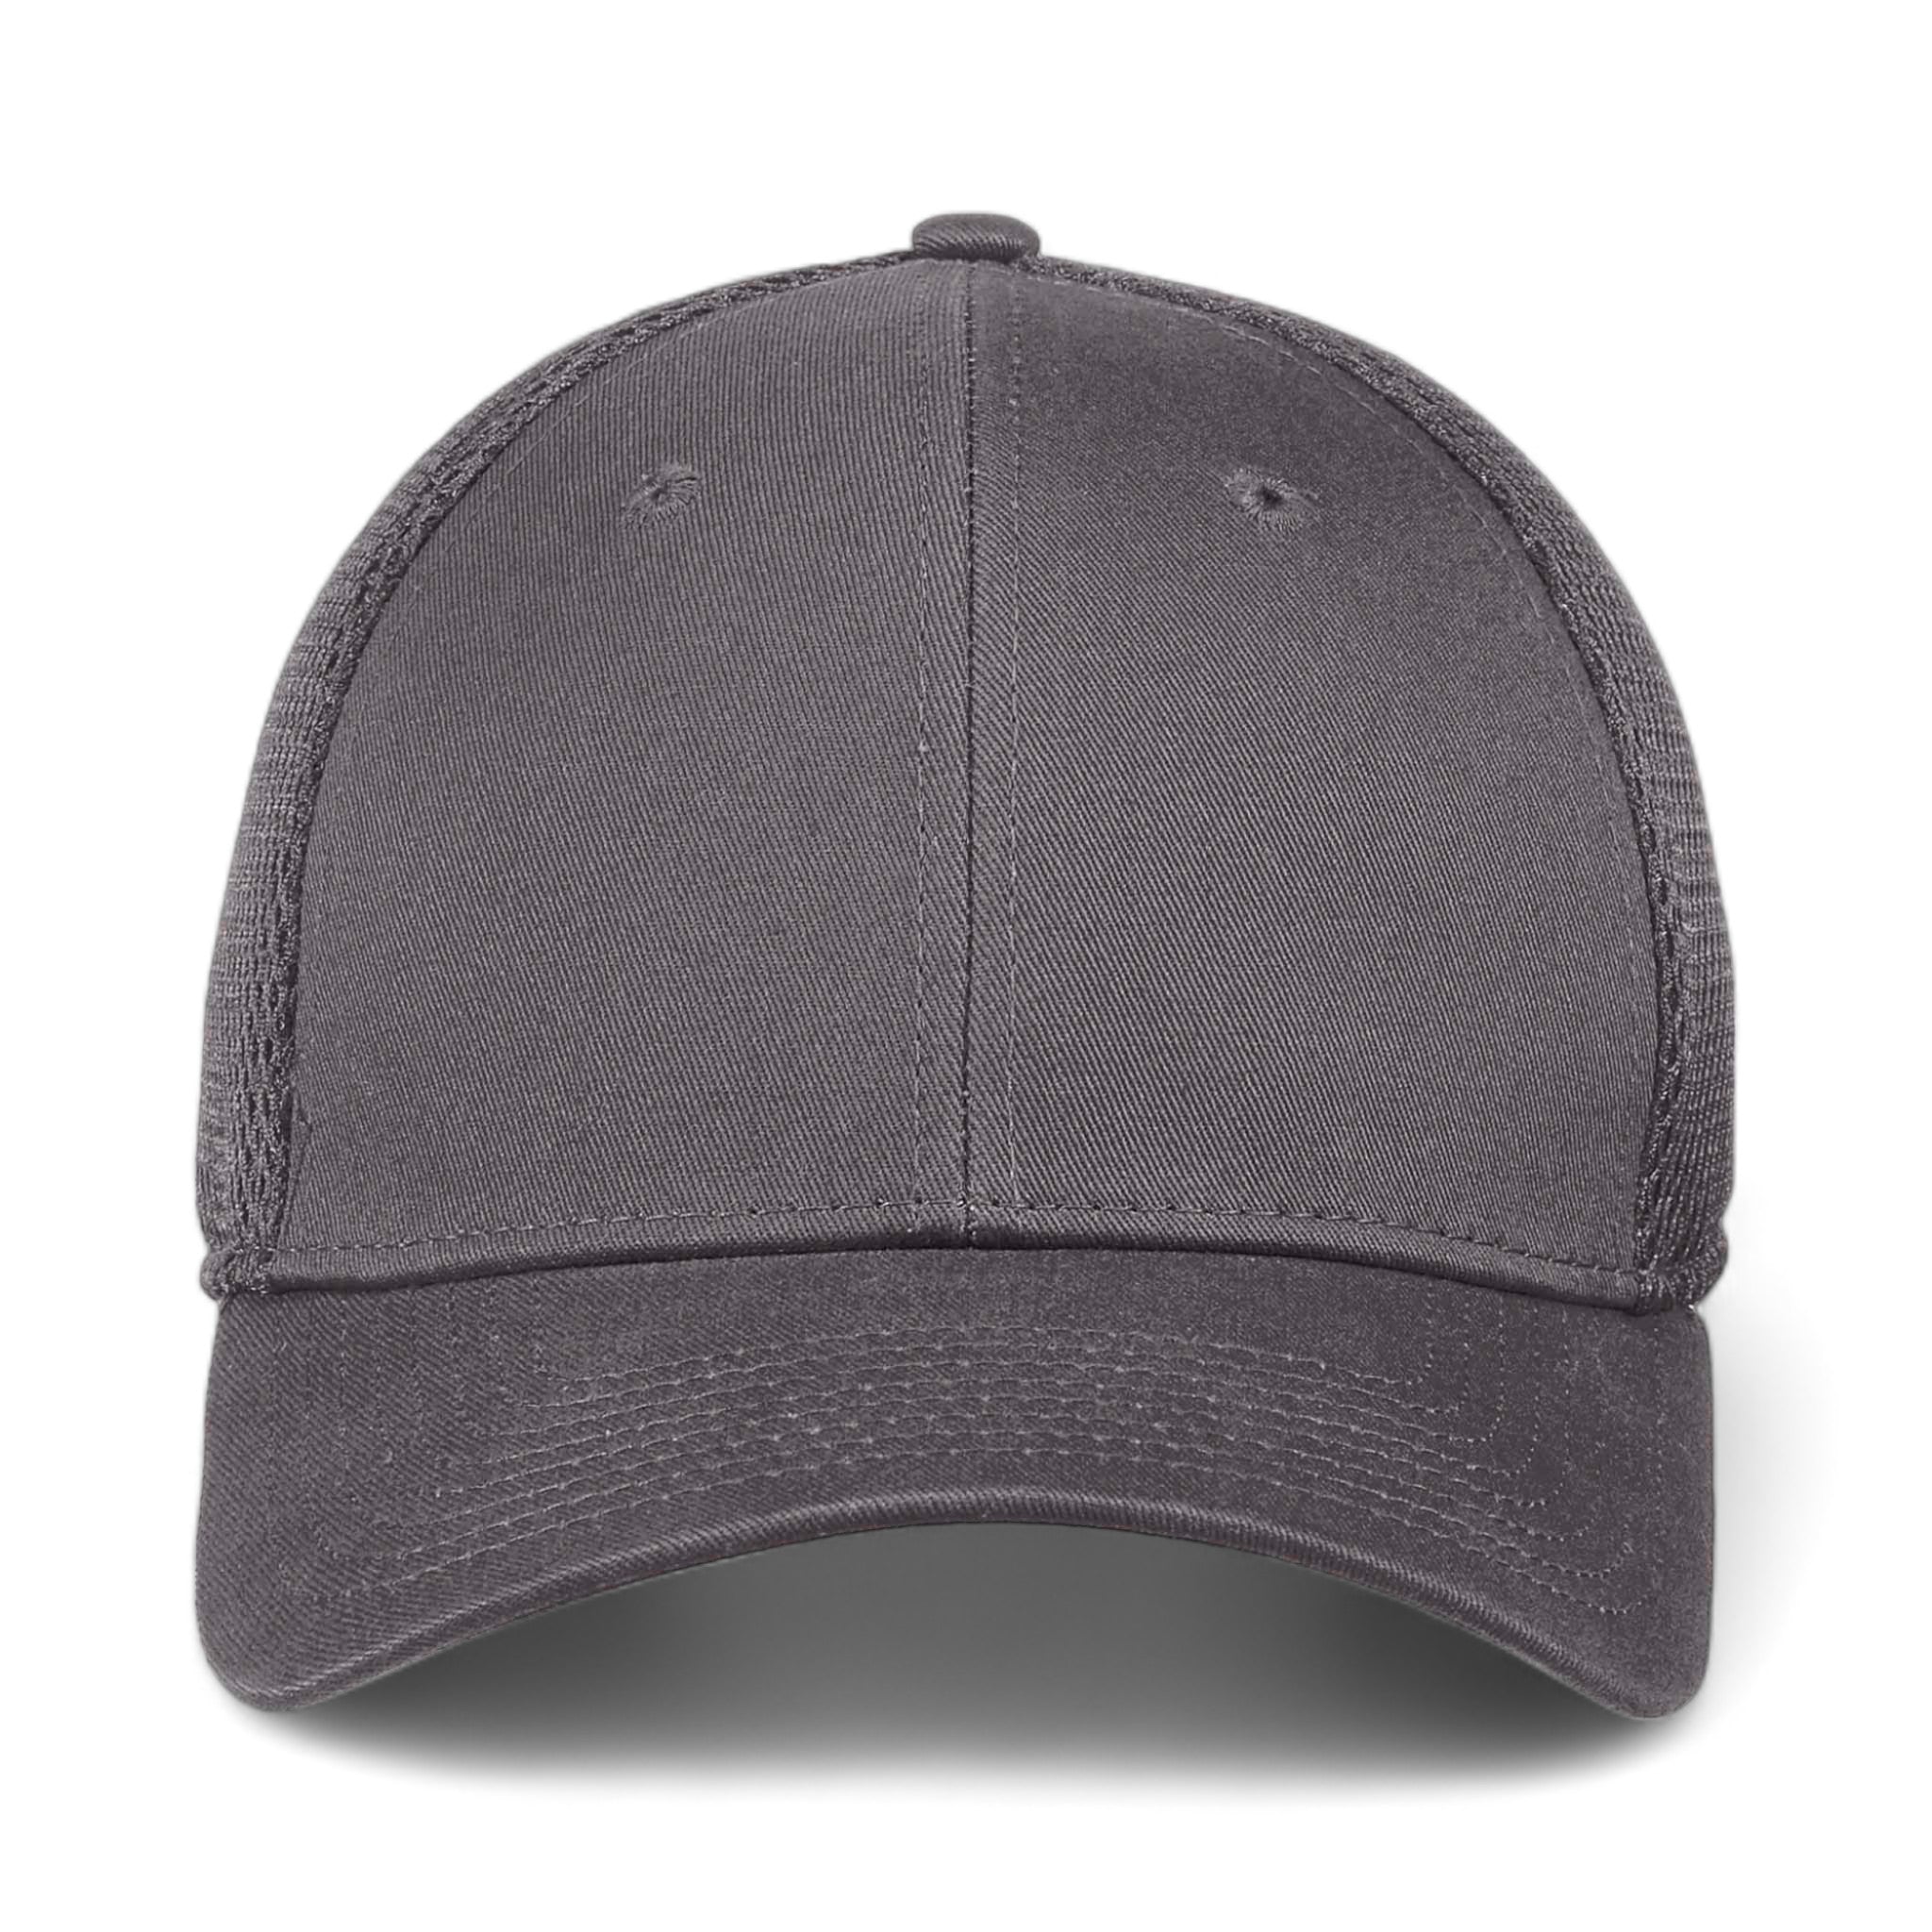 Front view of New Era NE1020 custom hat in charcoal and charcoal